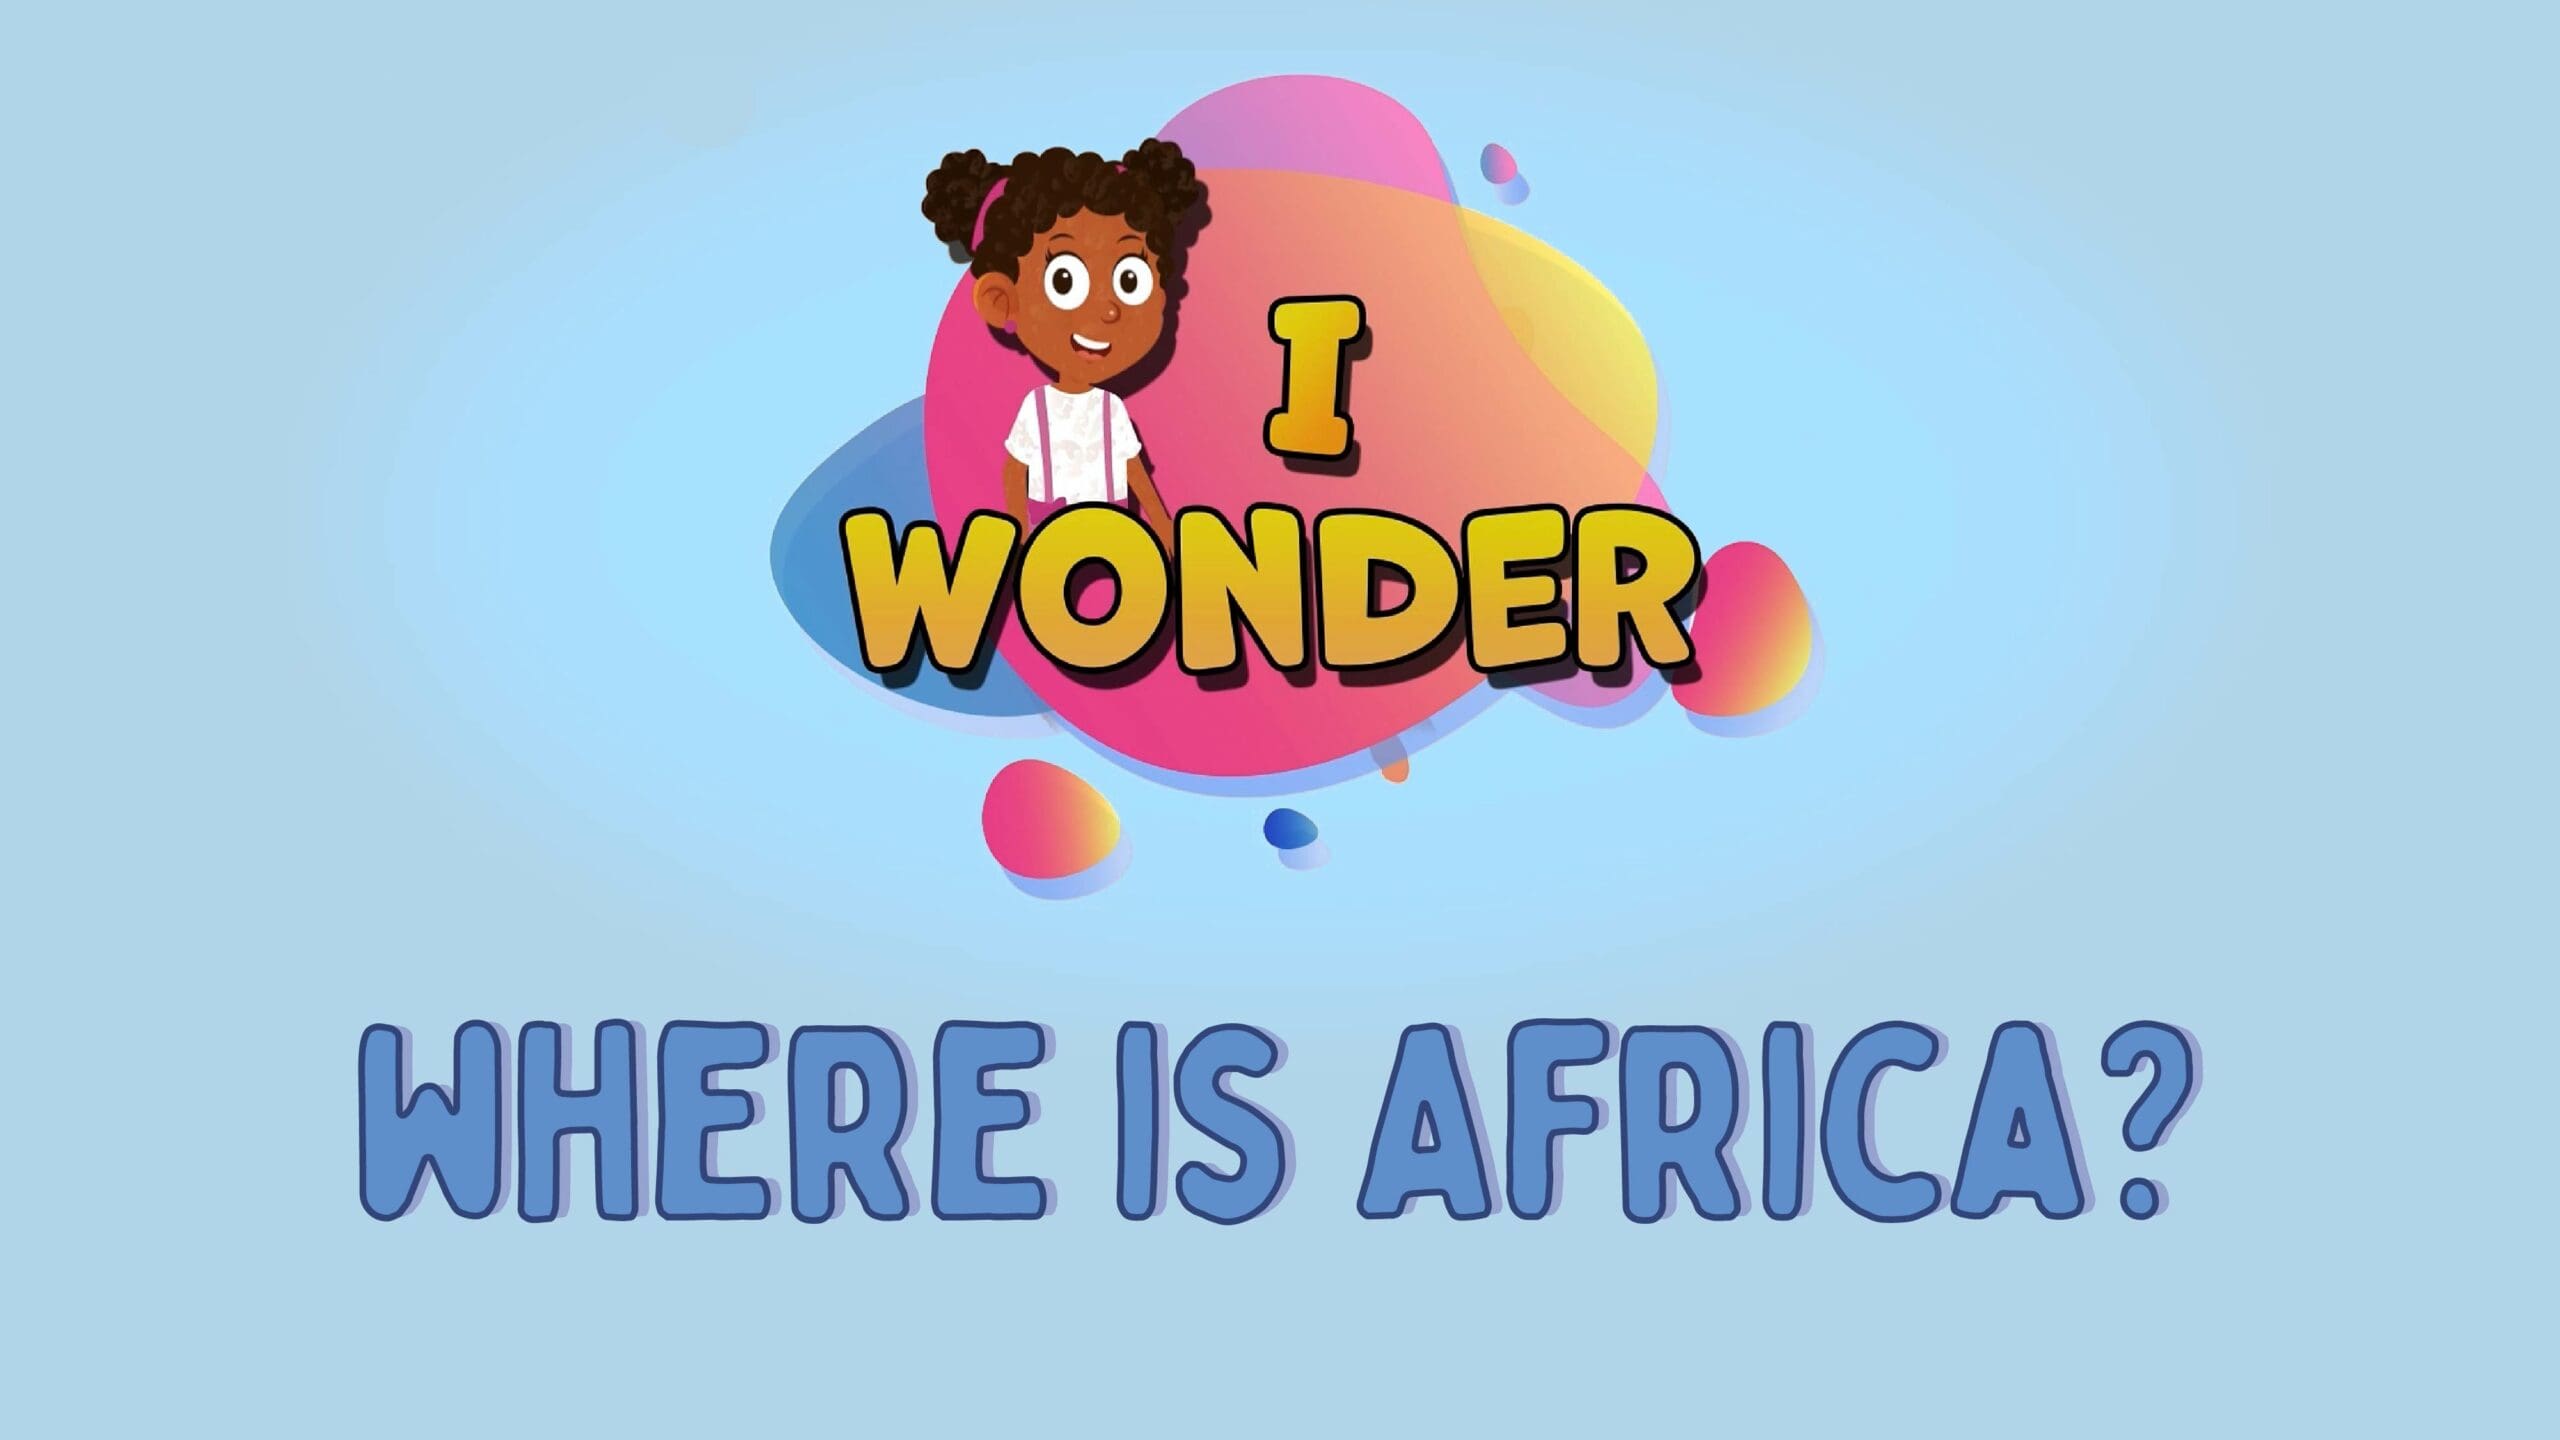 Where Is Africa?